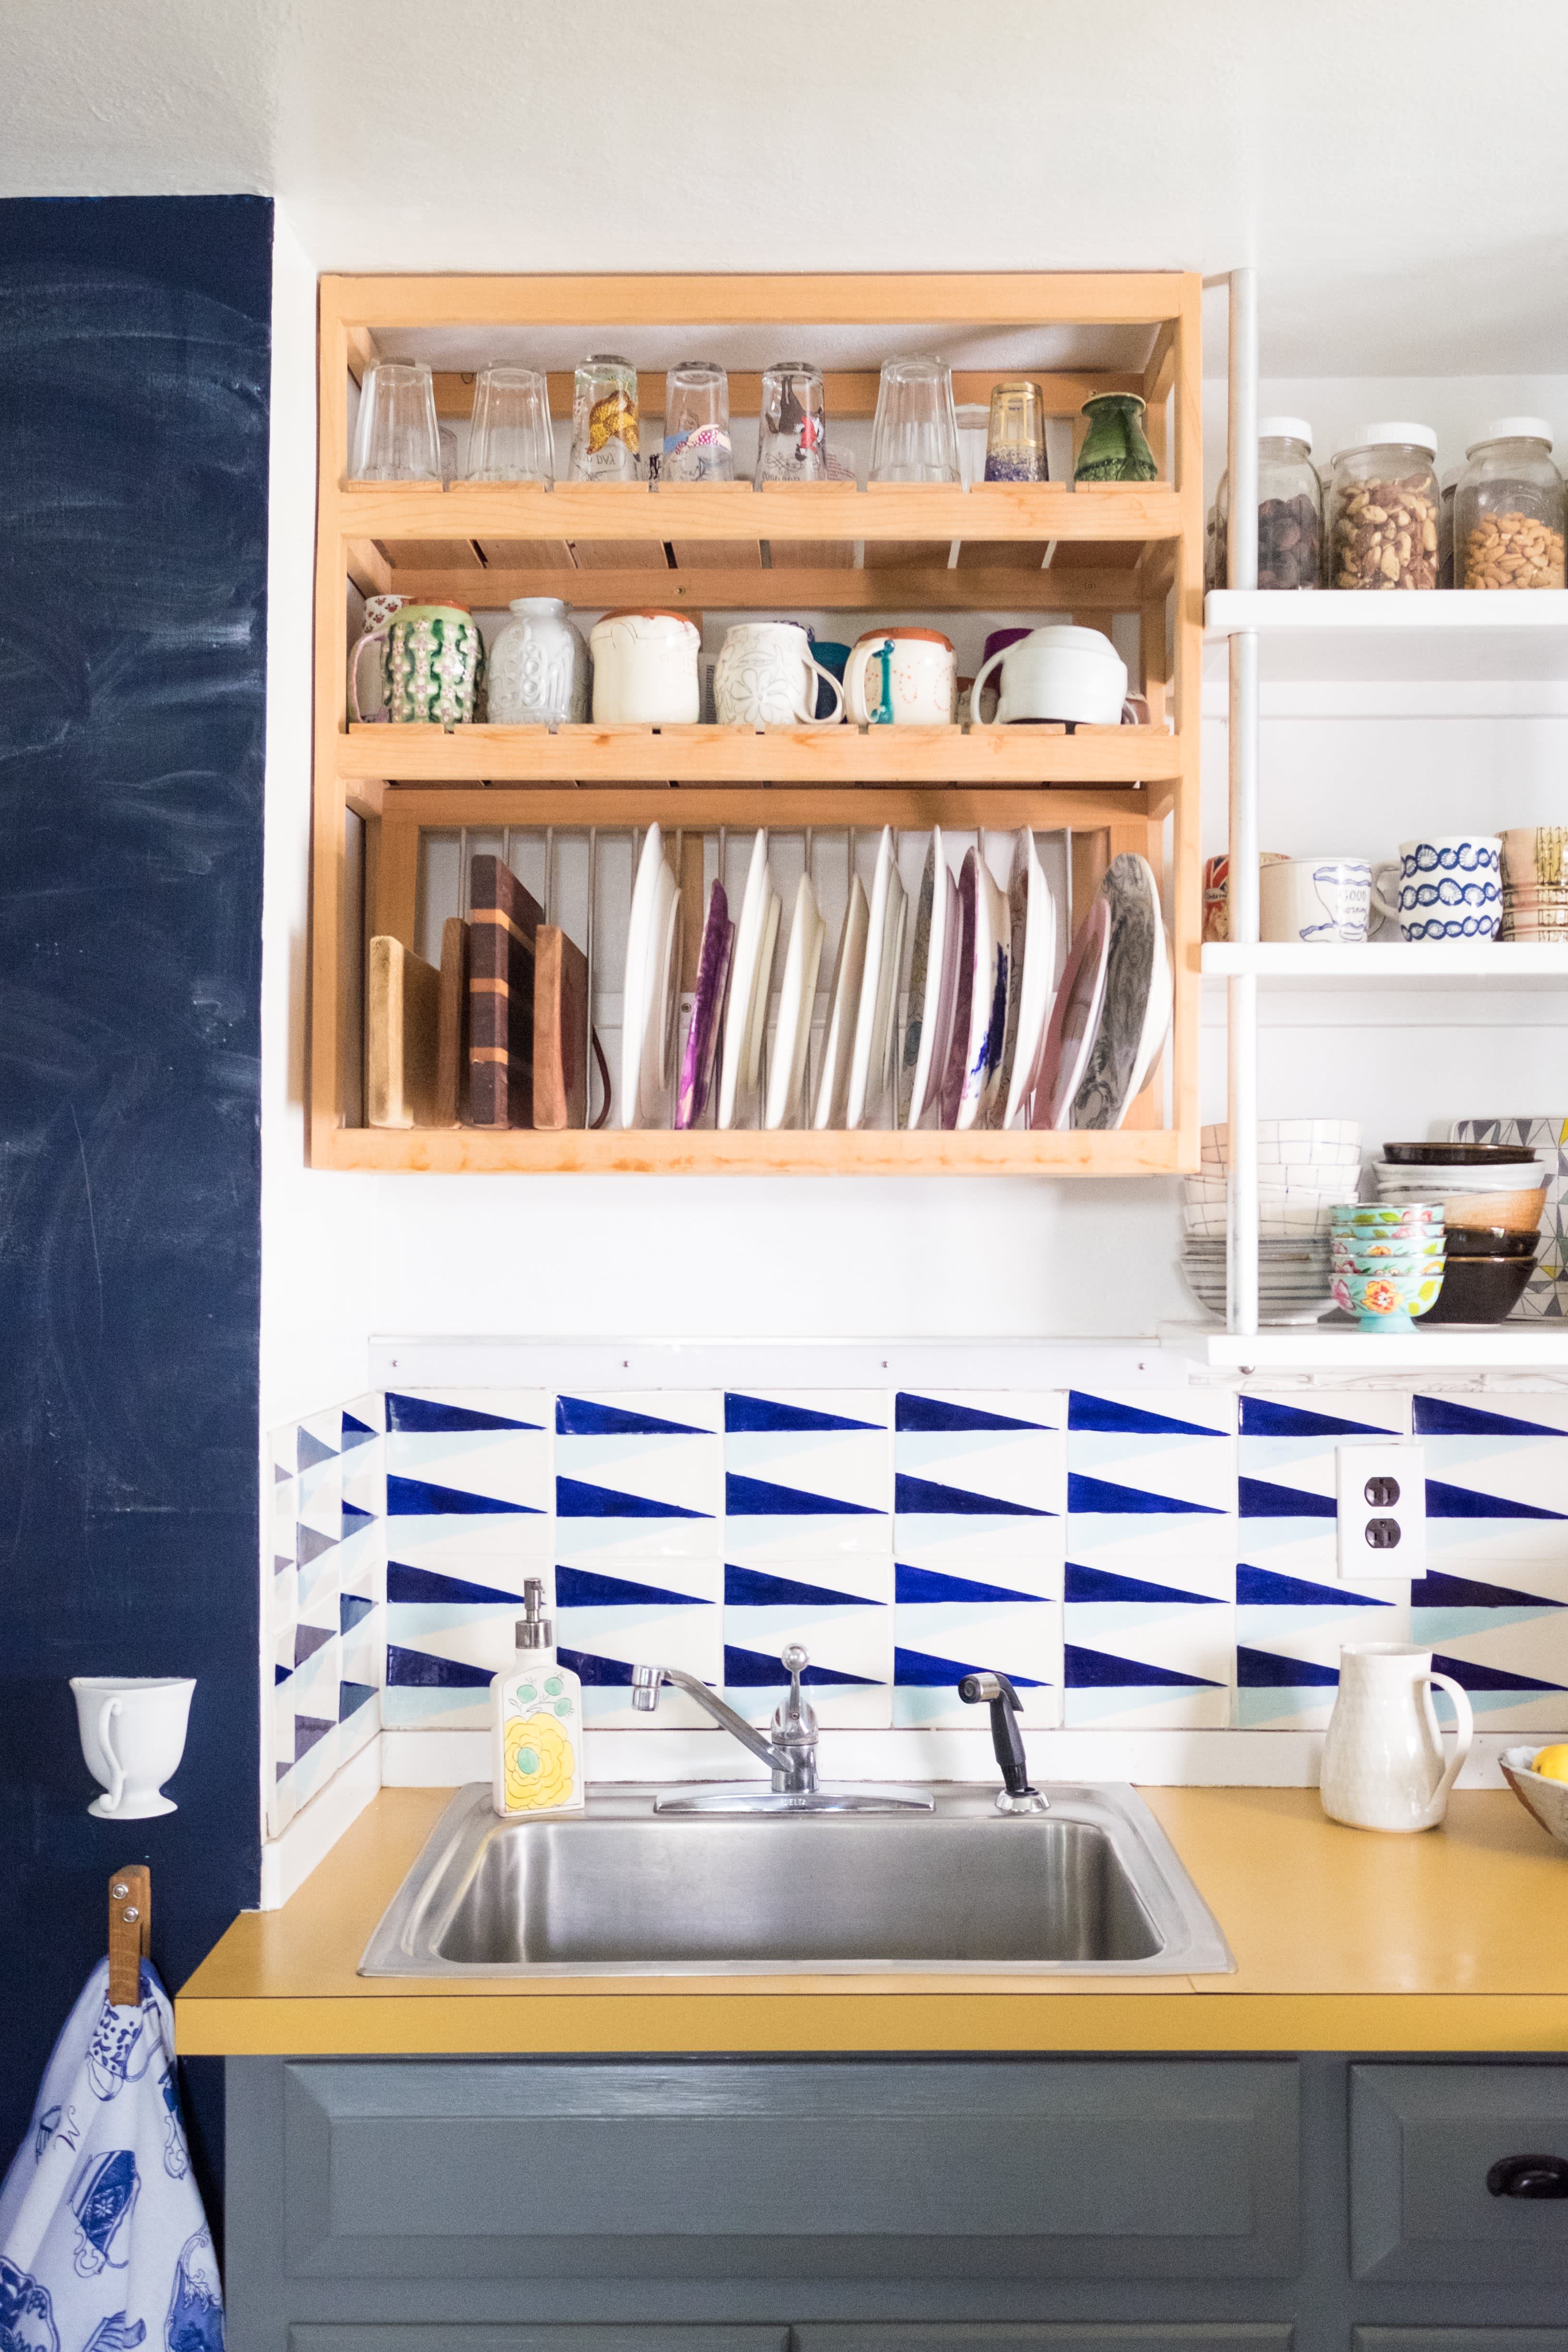 How to organize long and narrow kitchen cabinets